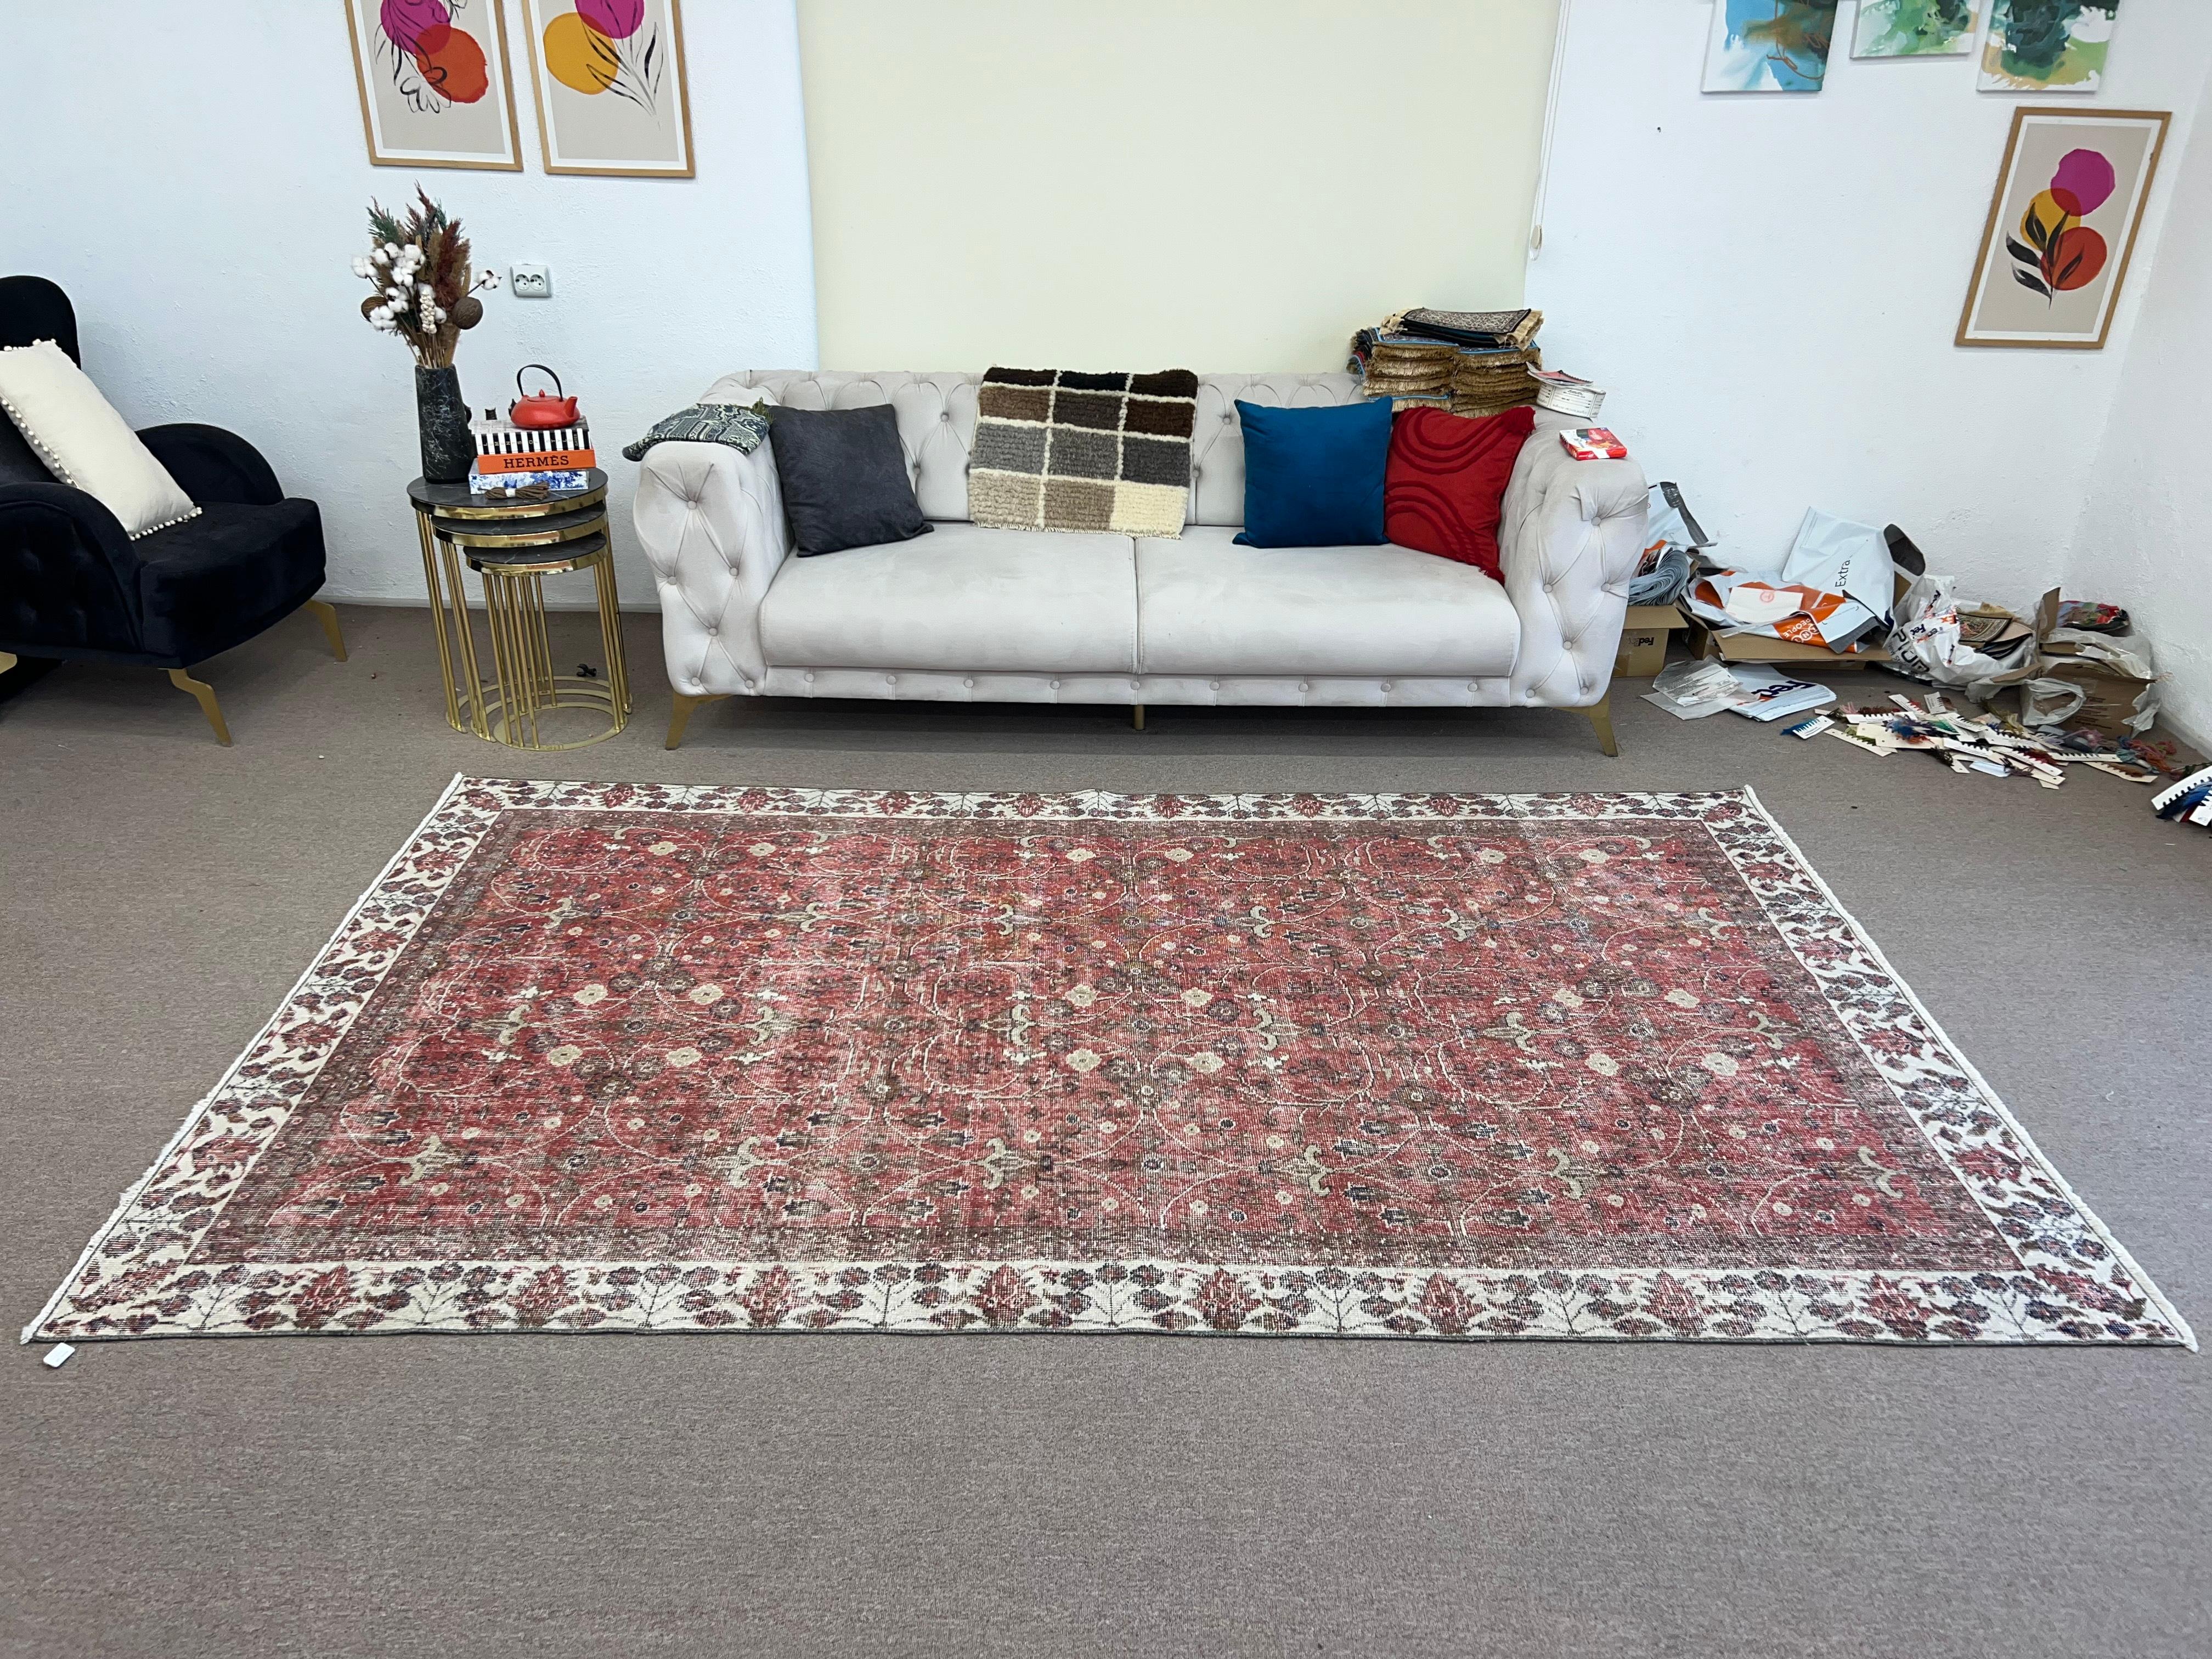 20th Century 6x10 Ft Floral Pattern Floor Covering, Vintage Handmade Turkish Wool Area Rug For Sale